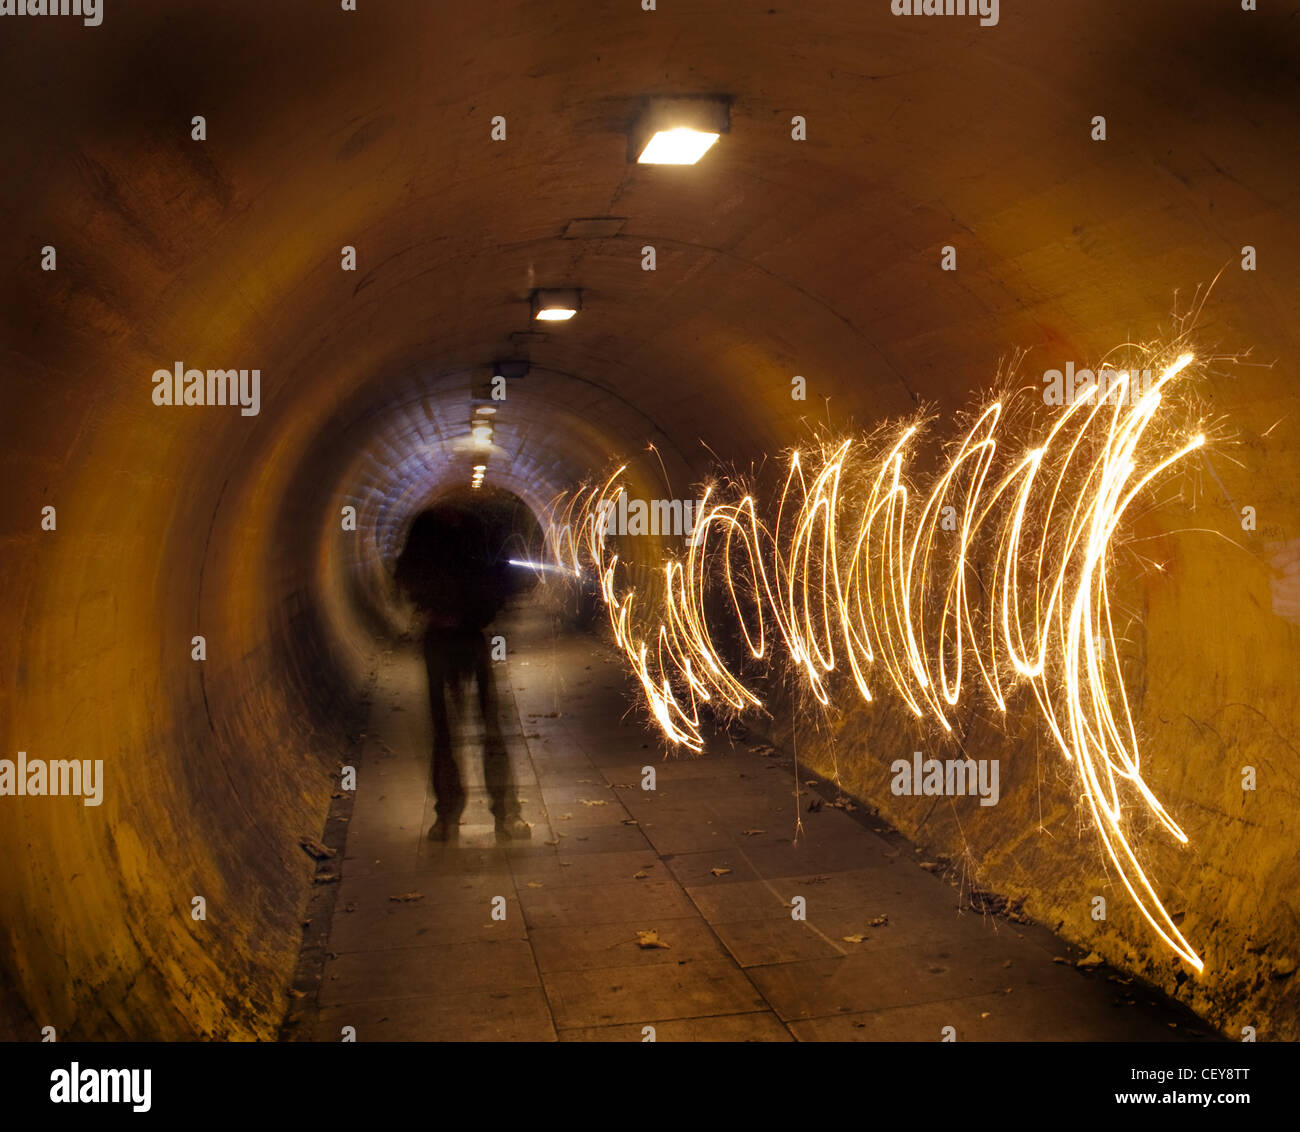 A man in a tunnel at night tunnelvision vision creating a path of light Stock Photo